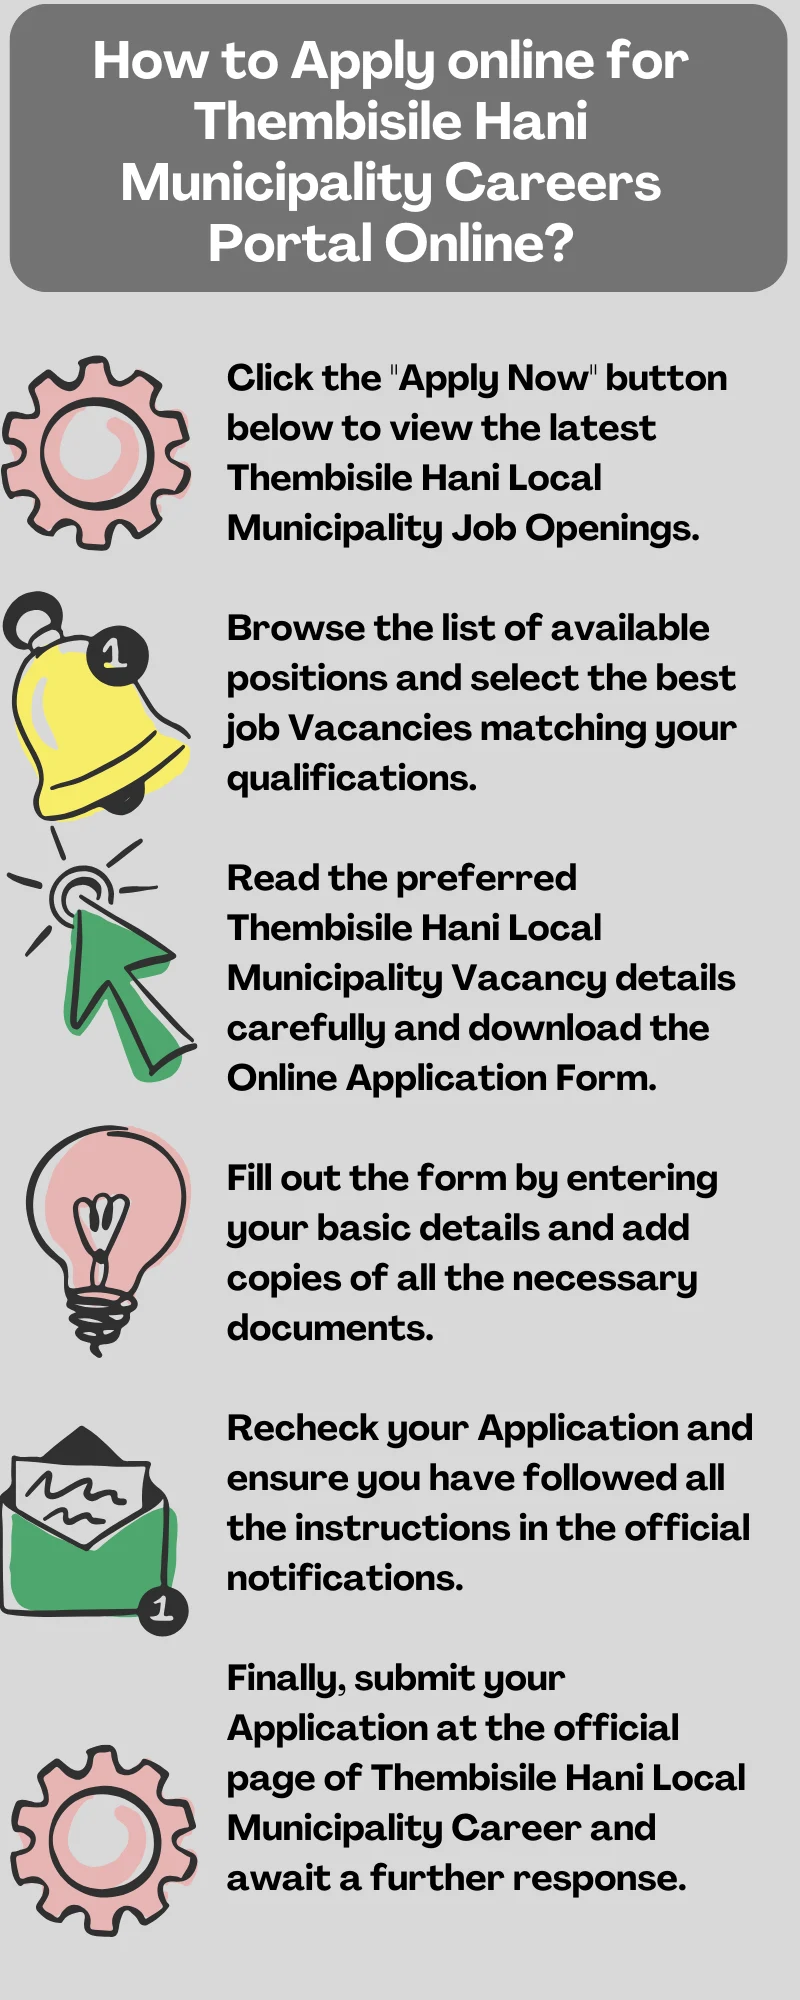 How to Apply online for Thembisile Hani Municipality Careers Portal Online?